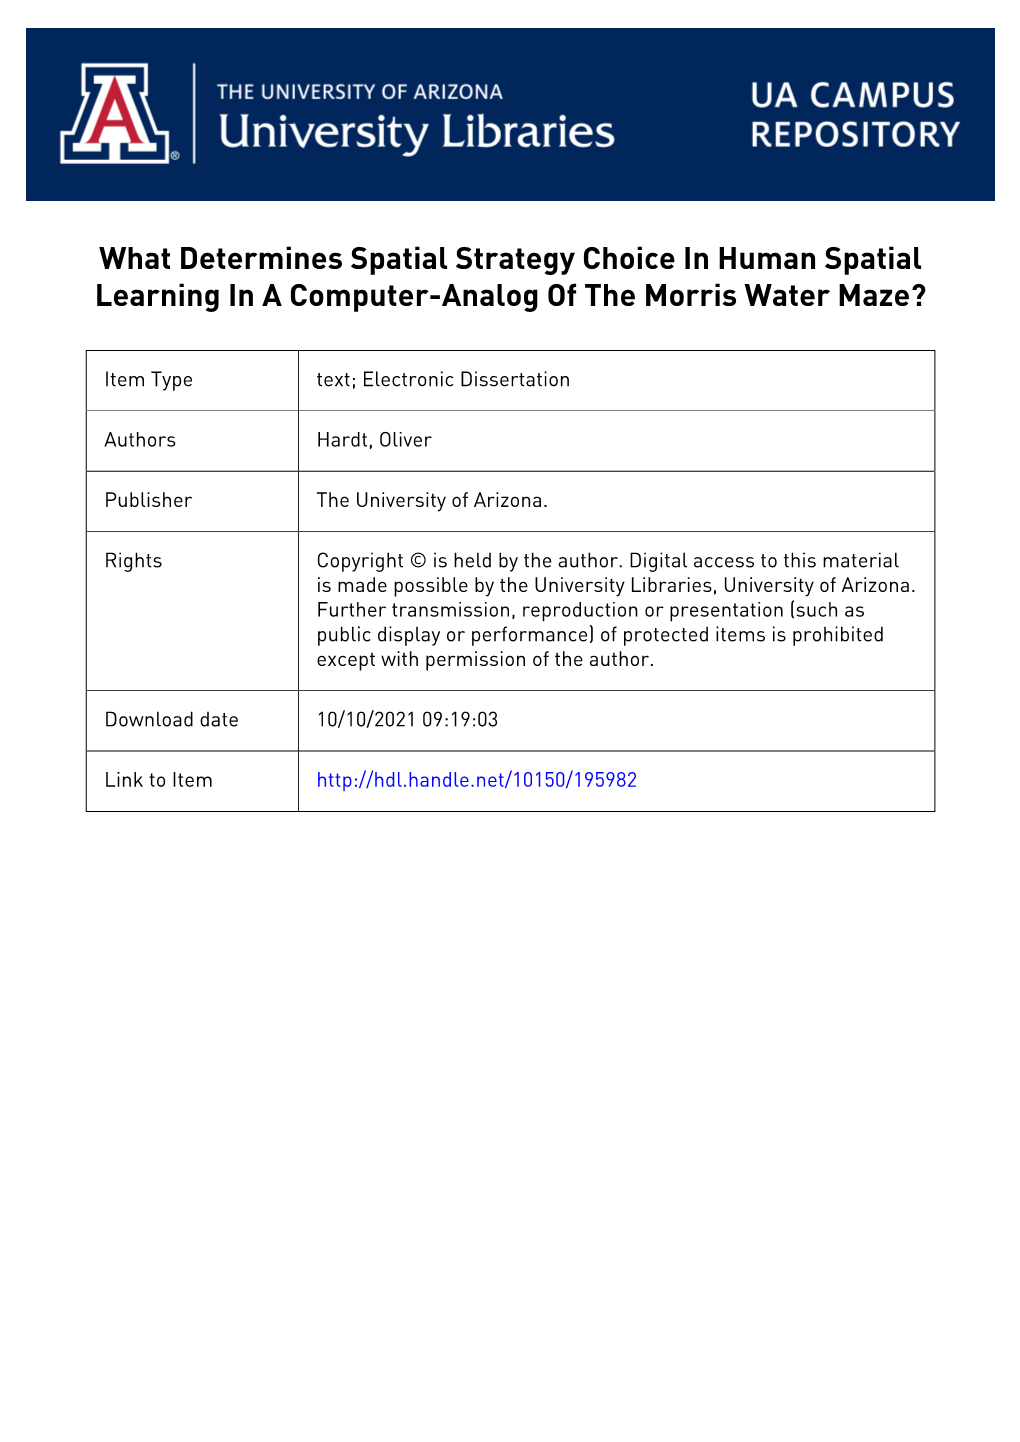 What Determines Spatial Strategy Choice in Human Spatial Learning in a Computer-Analog of the Morris Water Maze?